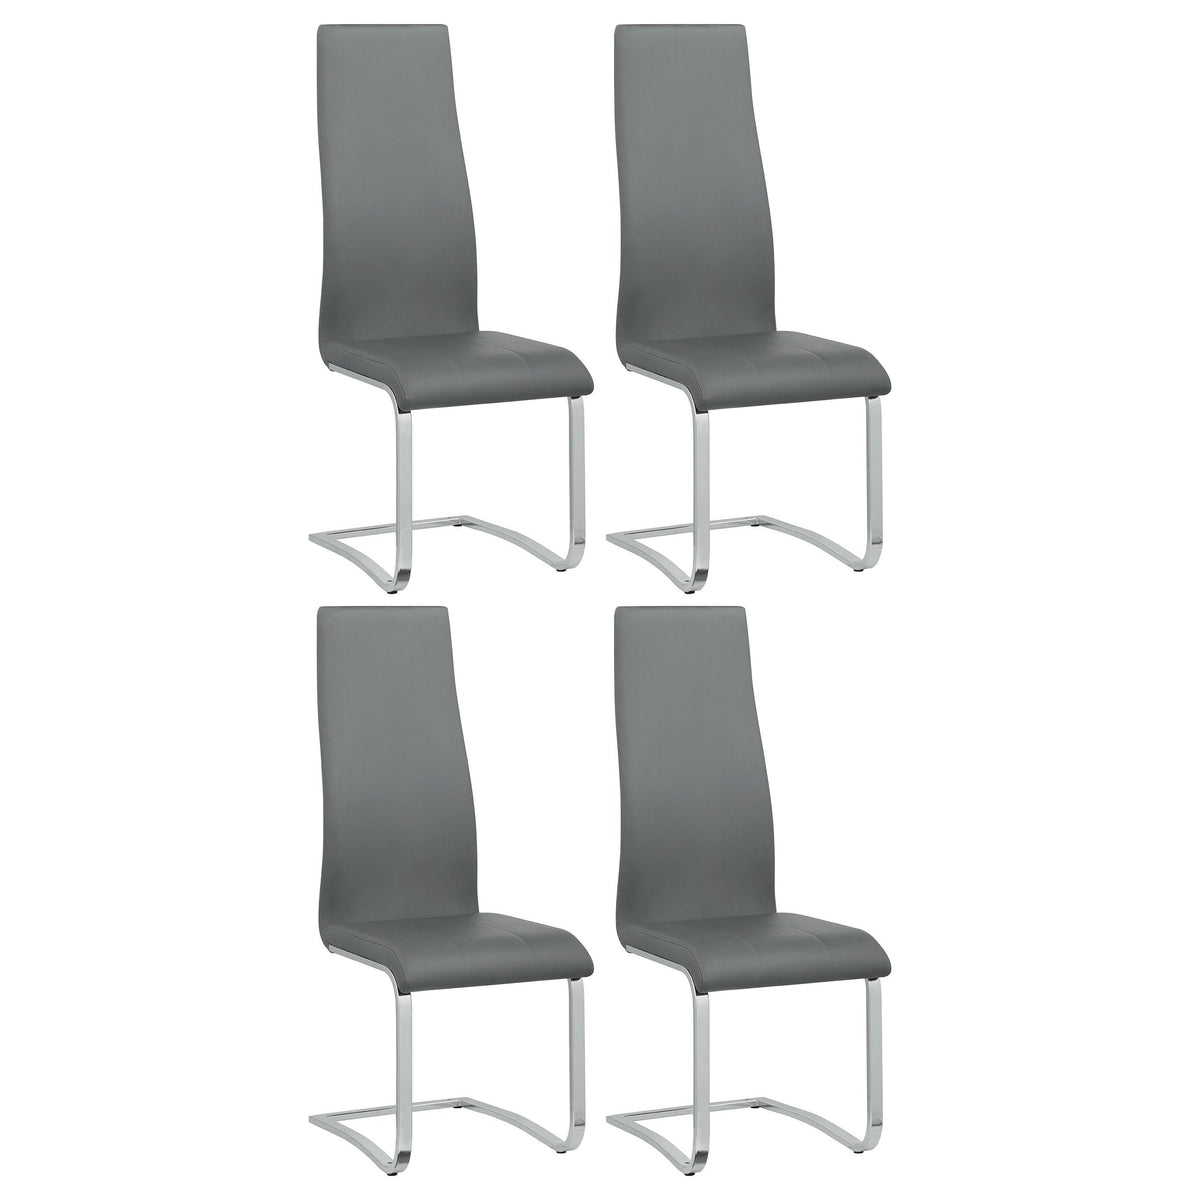 Montclair Upholstered High Back Side Chairs Grey and Chrome (Set of 4) Montclair Upholstered High Back Side Chairs Grey and Chrome (Set of 4) Half Price Furniture